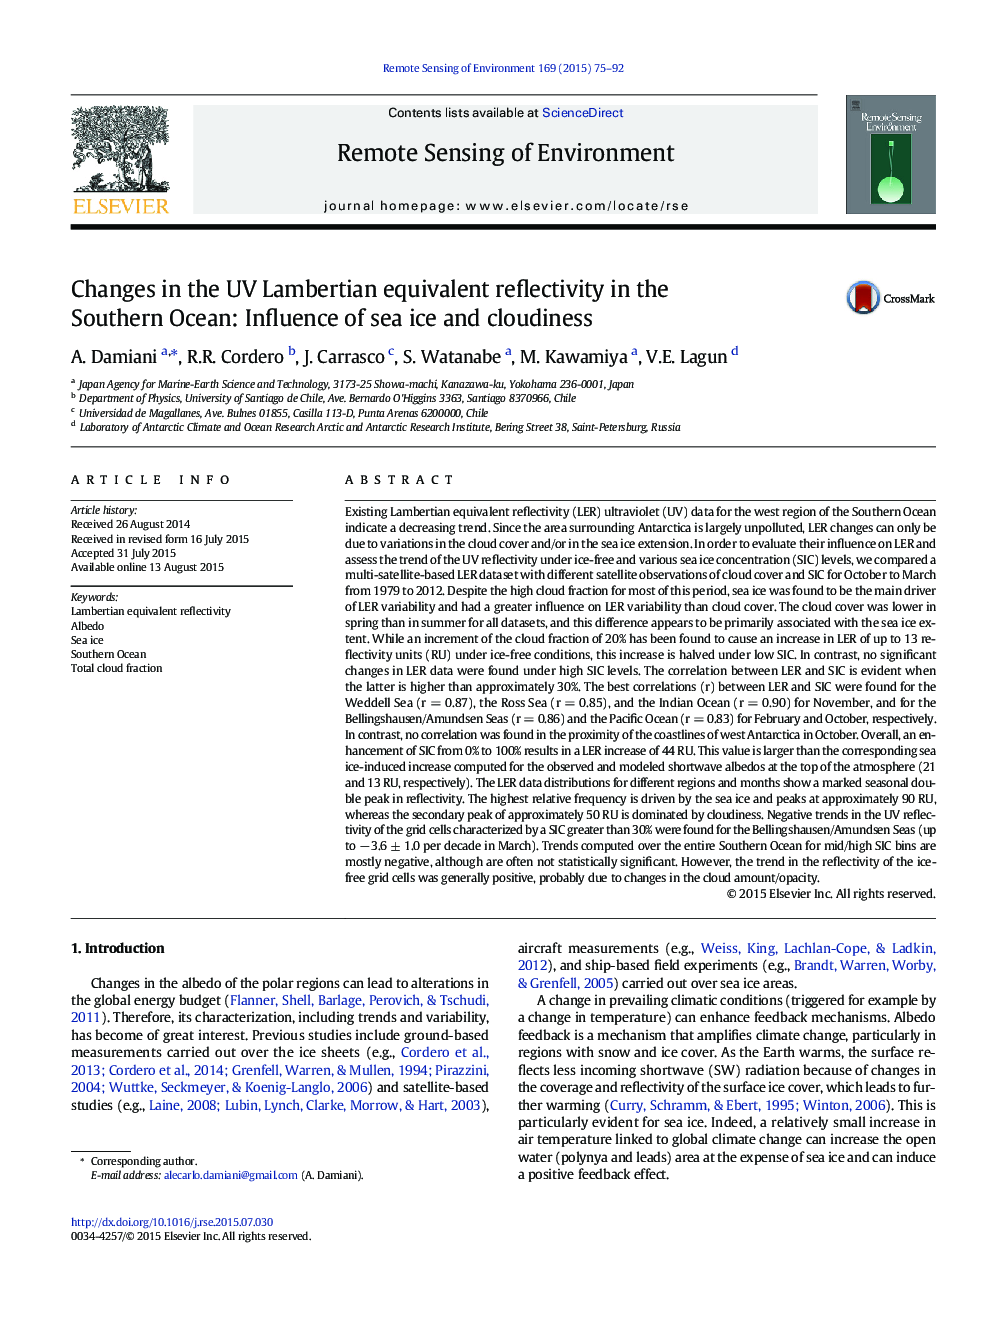 Changes in the UV Lambertian equivalent reflectivity in the Southern Ocean: Influence of sea ice and cloudiness